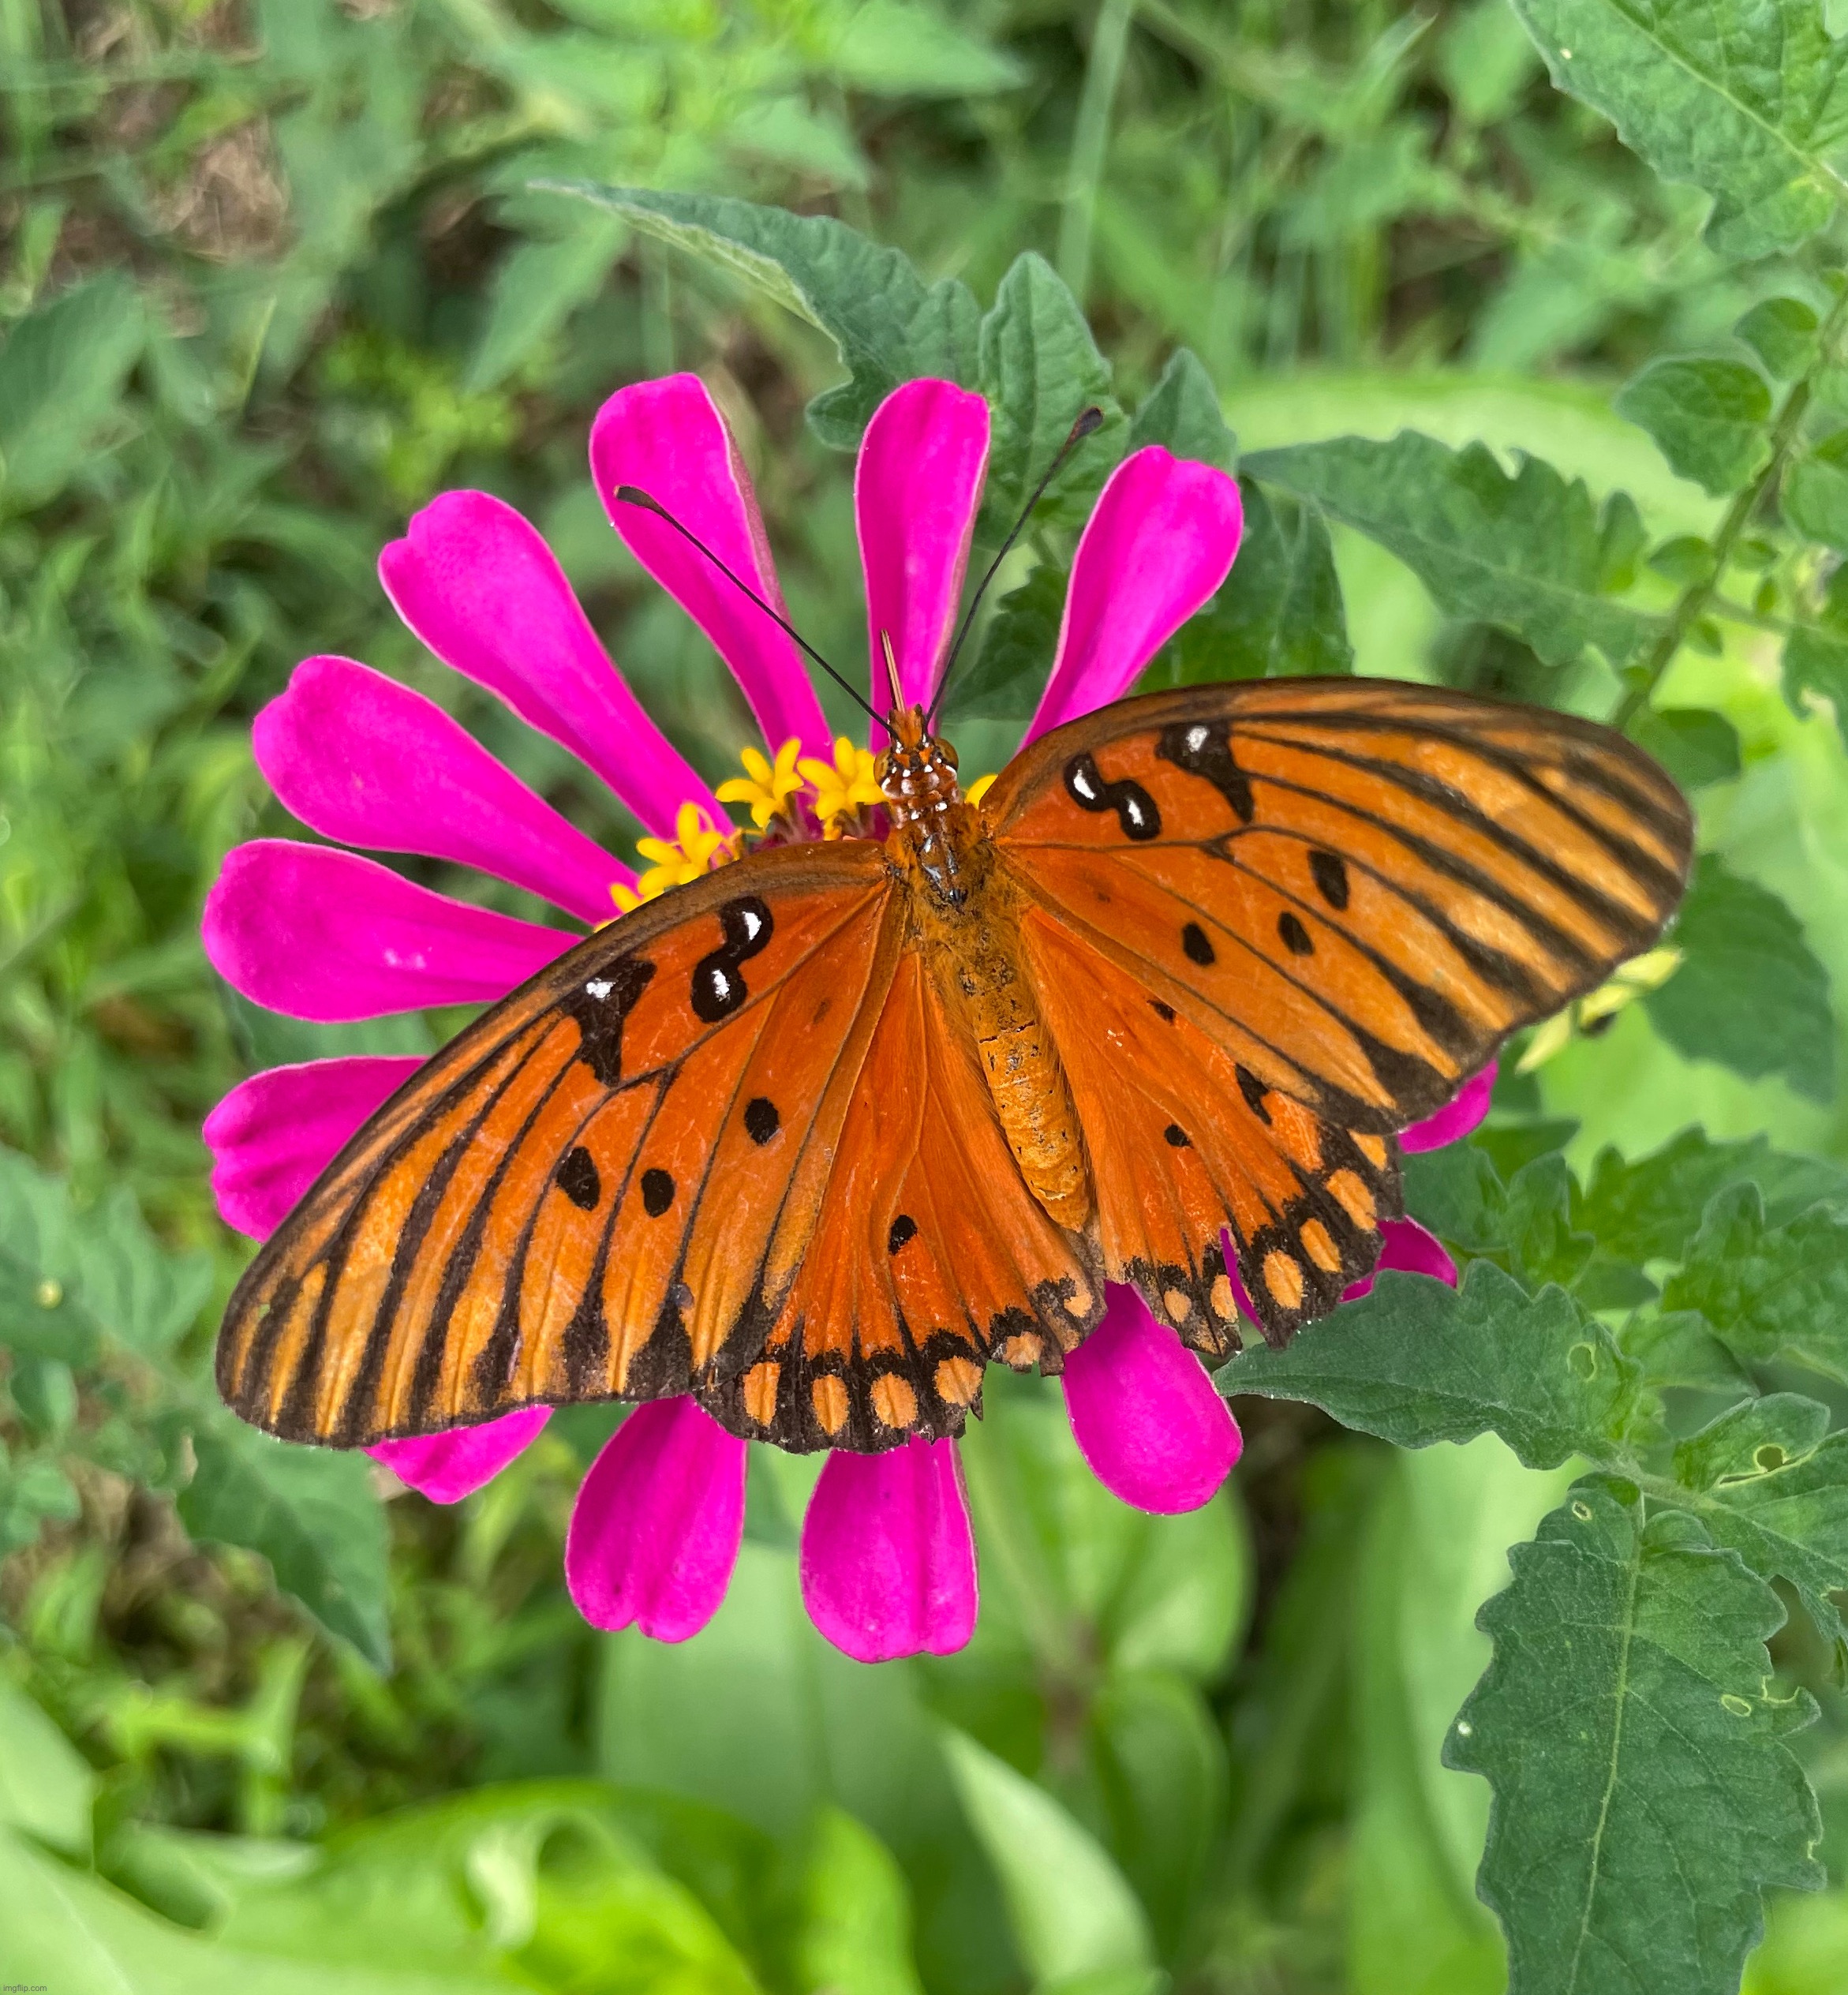 Butterfly on a flower | image tagged in butterfly,flowers,photography,photos | made w/ Imgflip meme maker